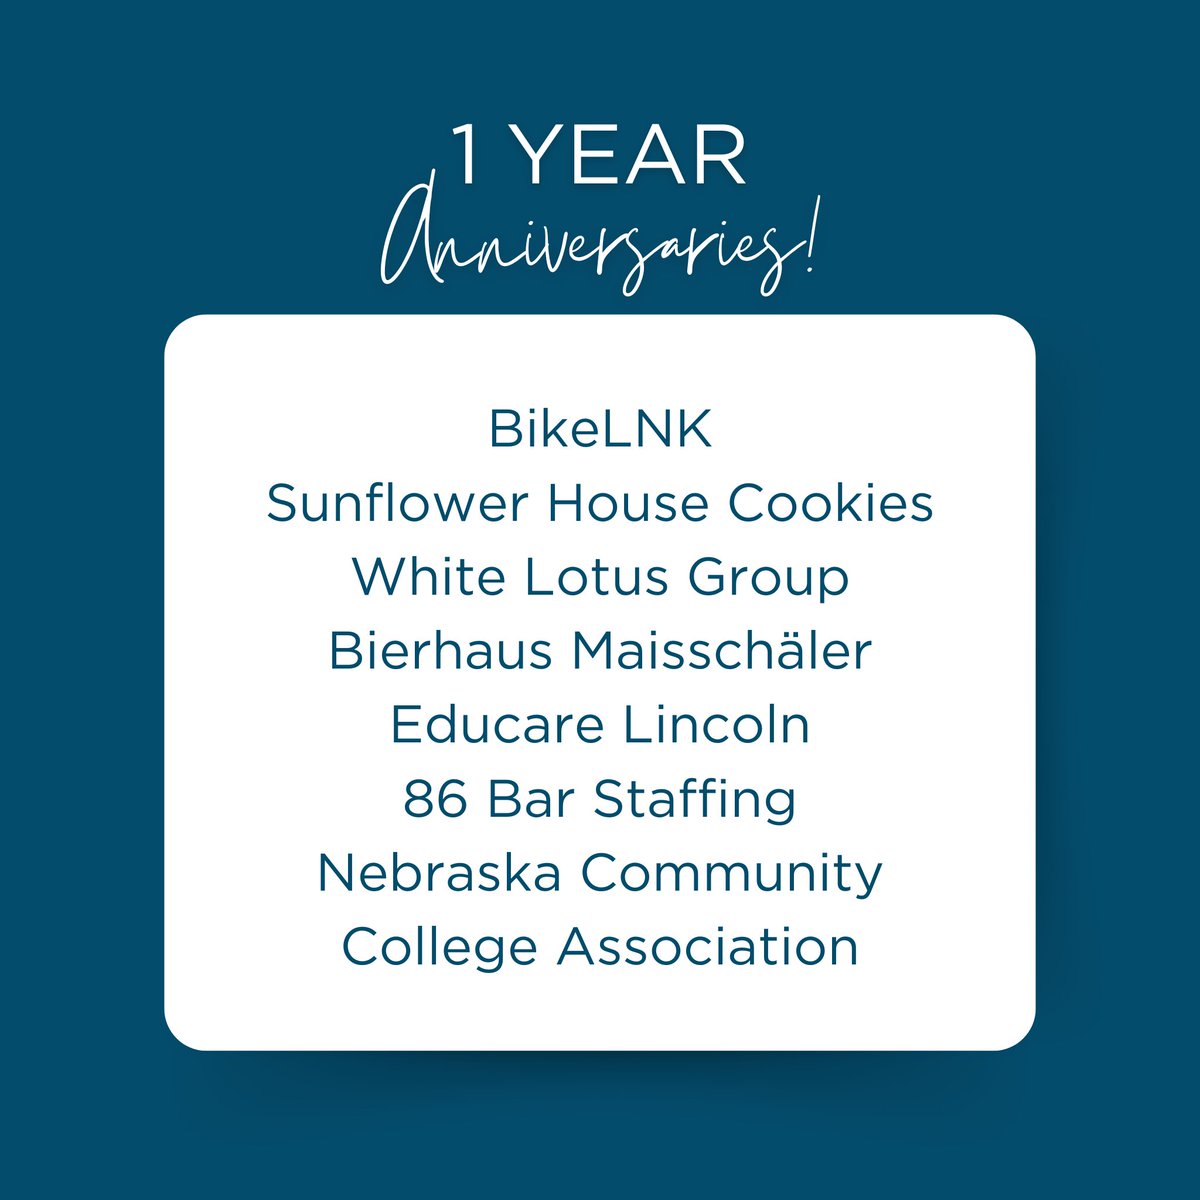 Congratulations to our Chamber Members celebrating 1 year anniversaries!🥳 Thank you for your continued support and commitment to our city. #WeChooseLincoln